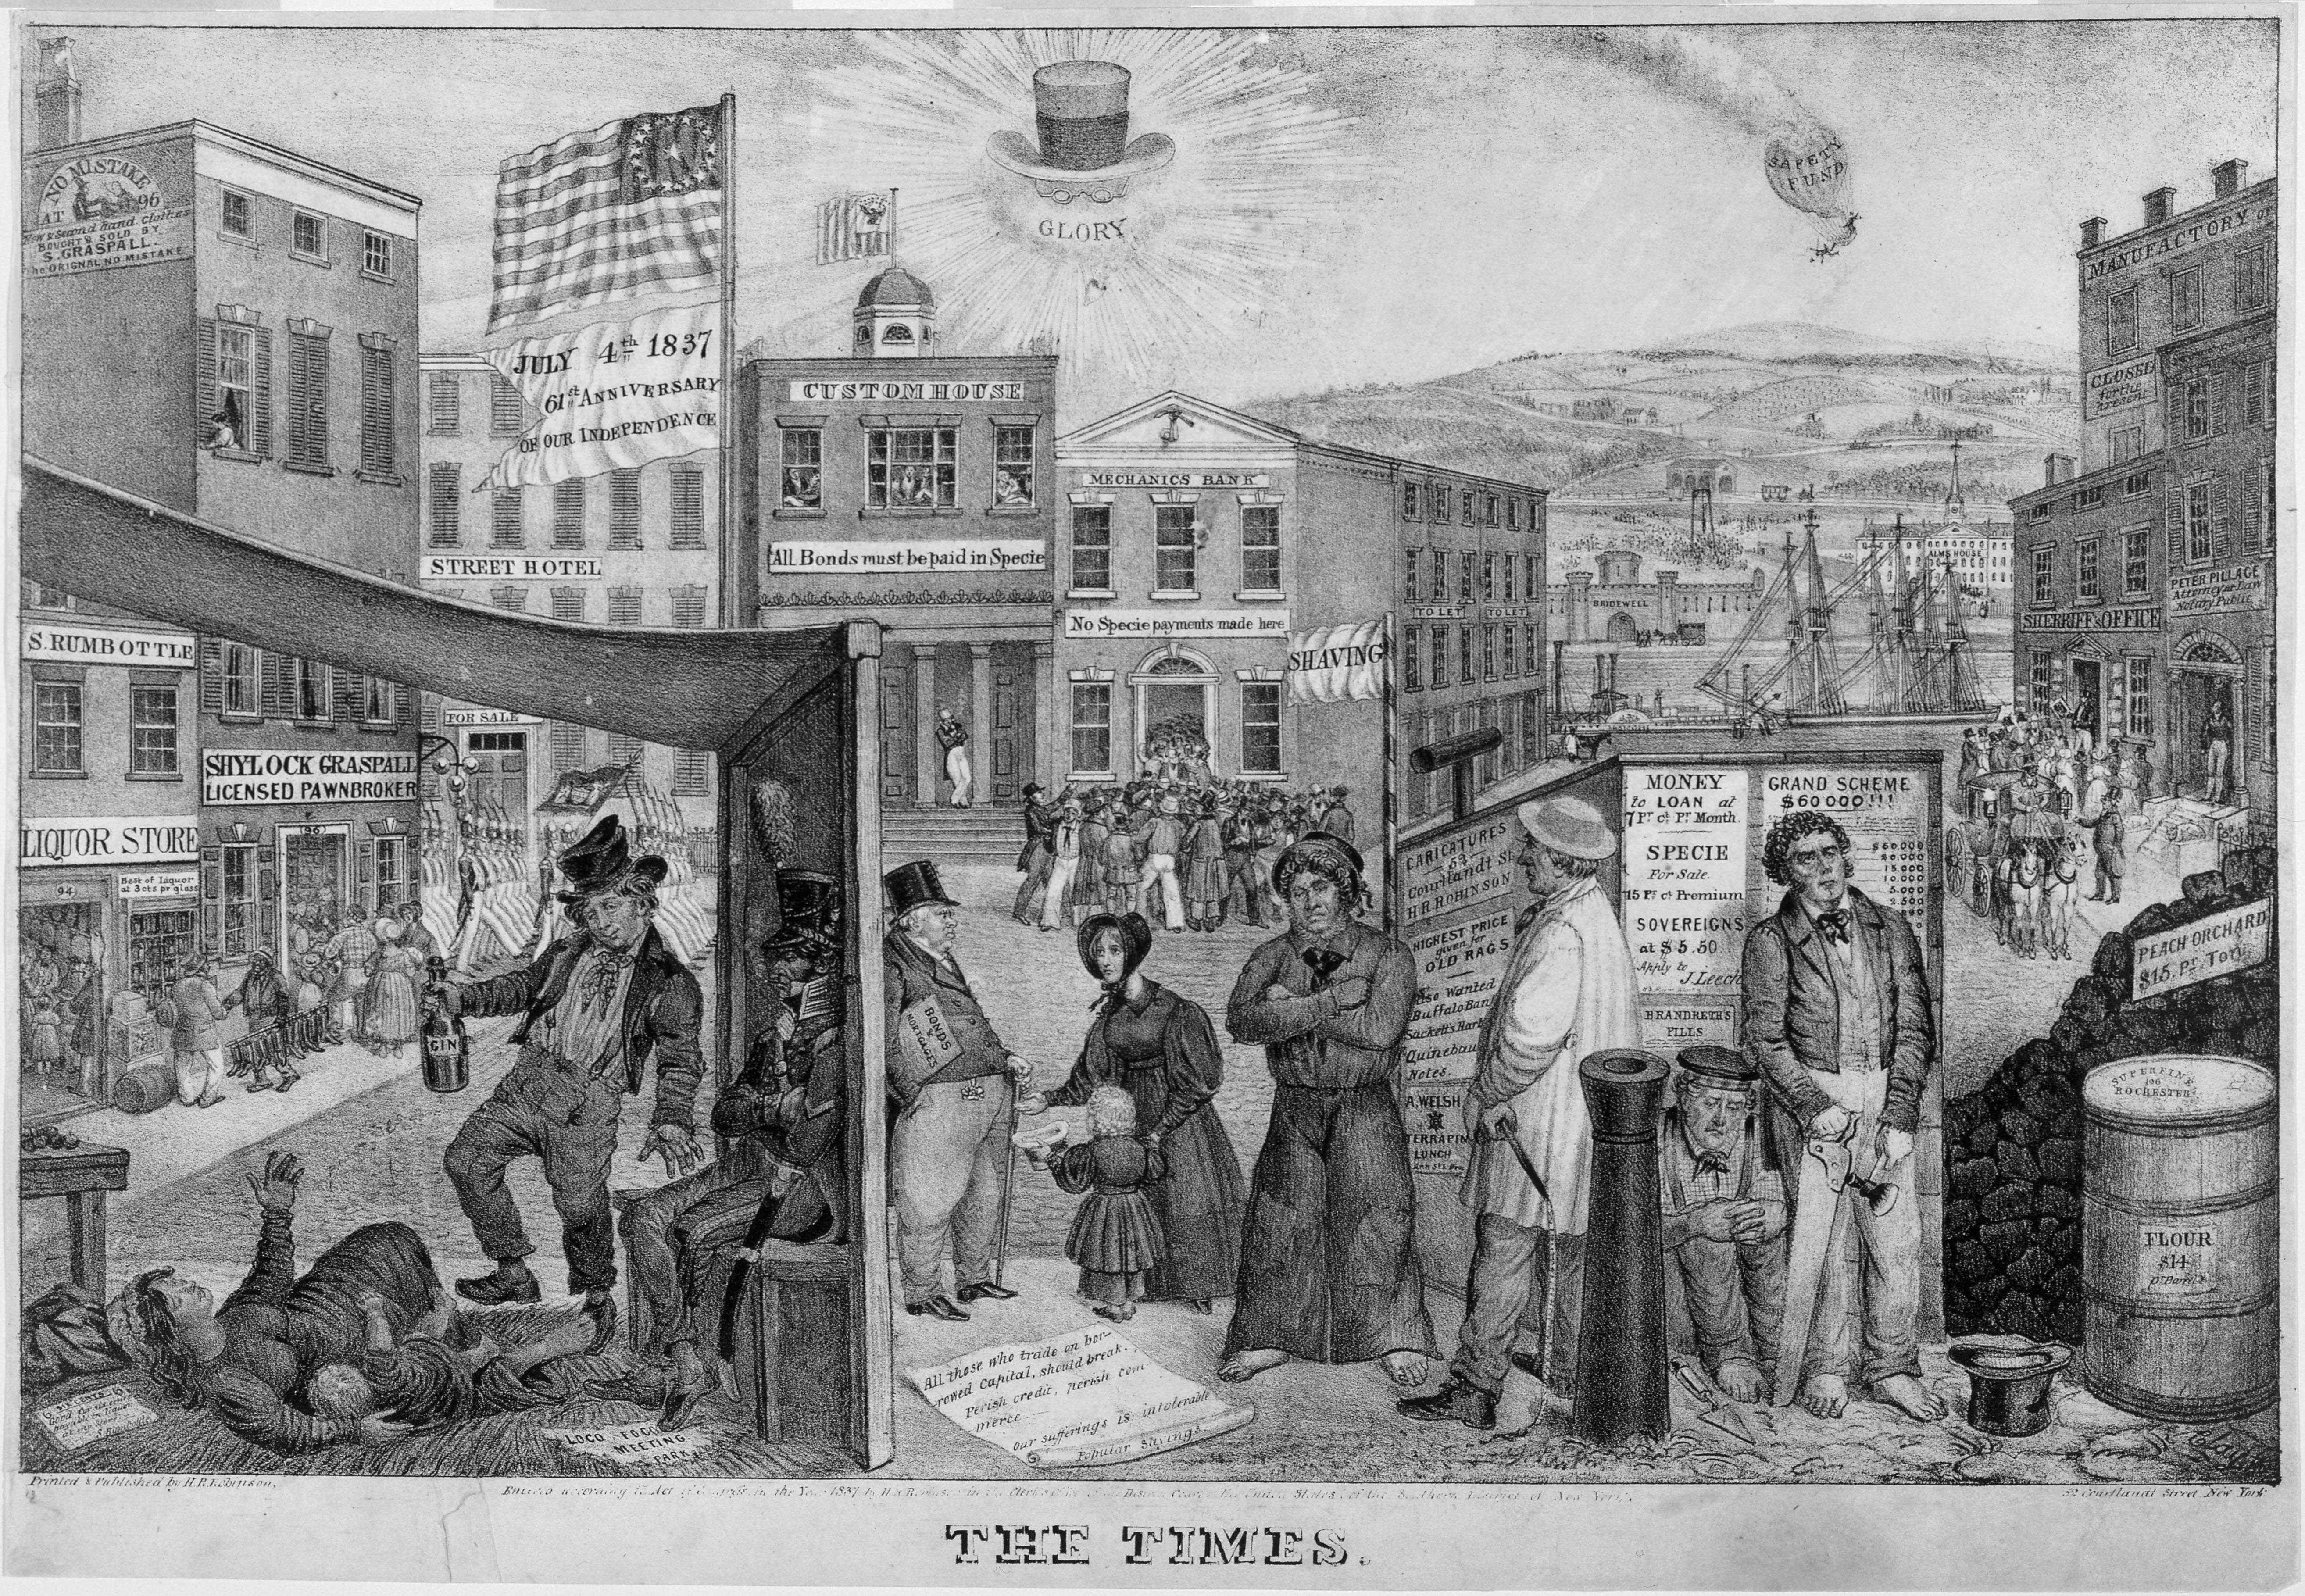 Print showing a street scene, with the American flag flying over unemployed young men, drunkards, families begging, and pawn shops. 